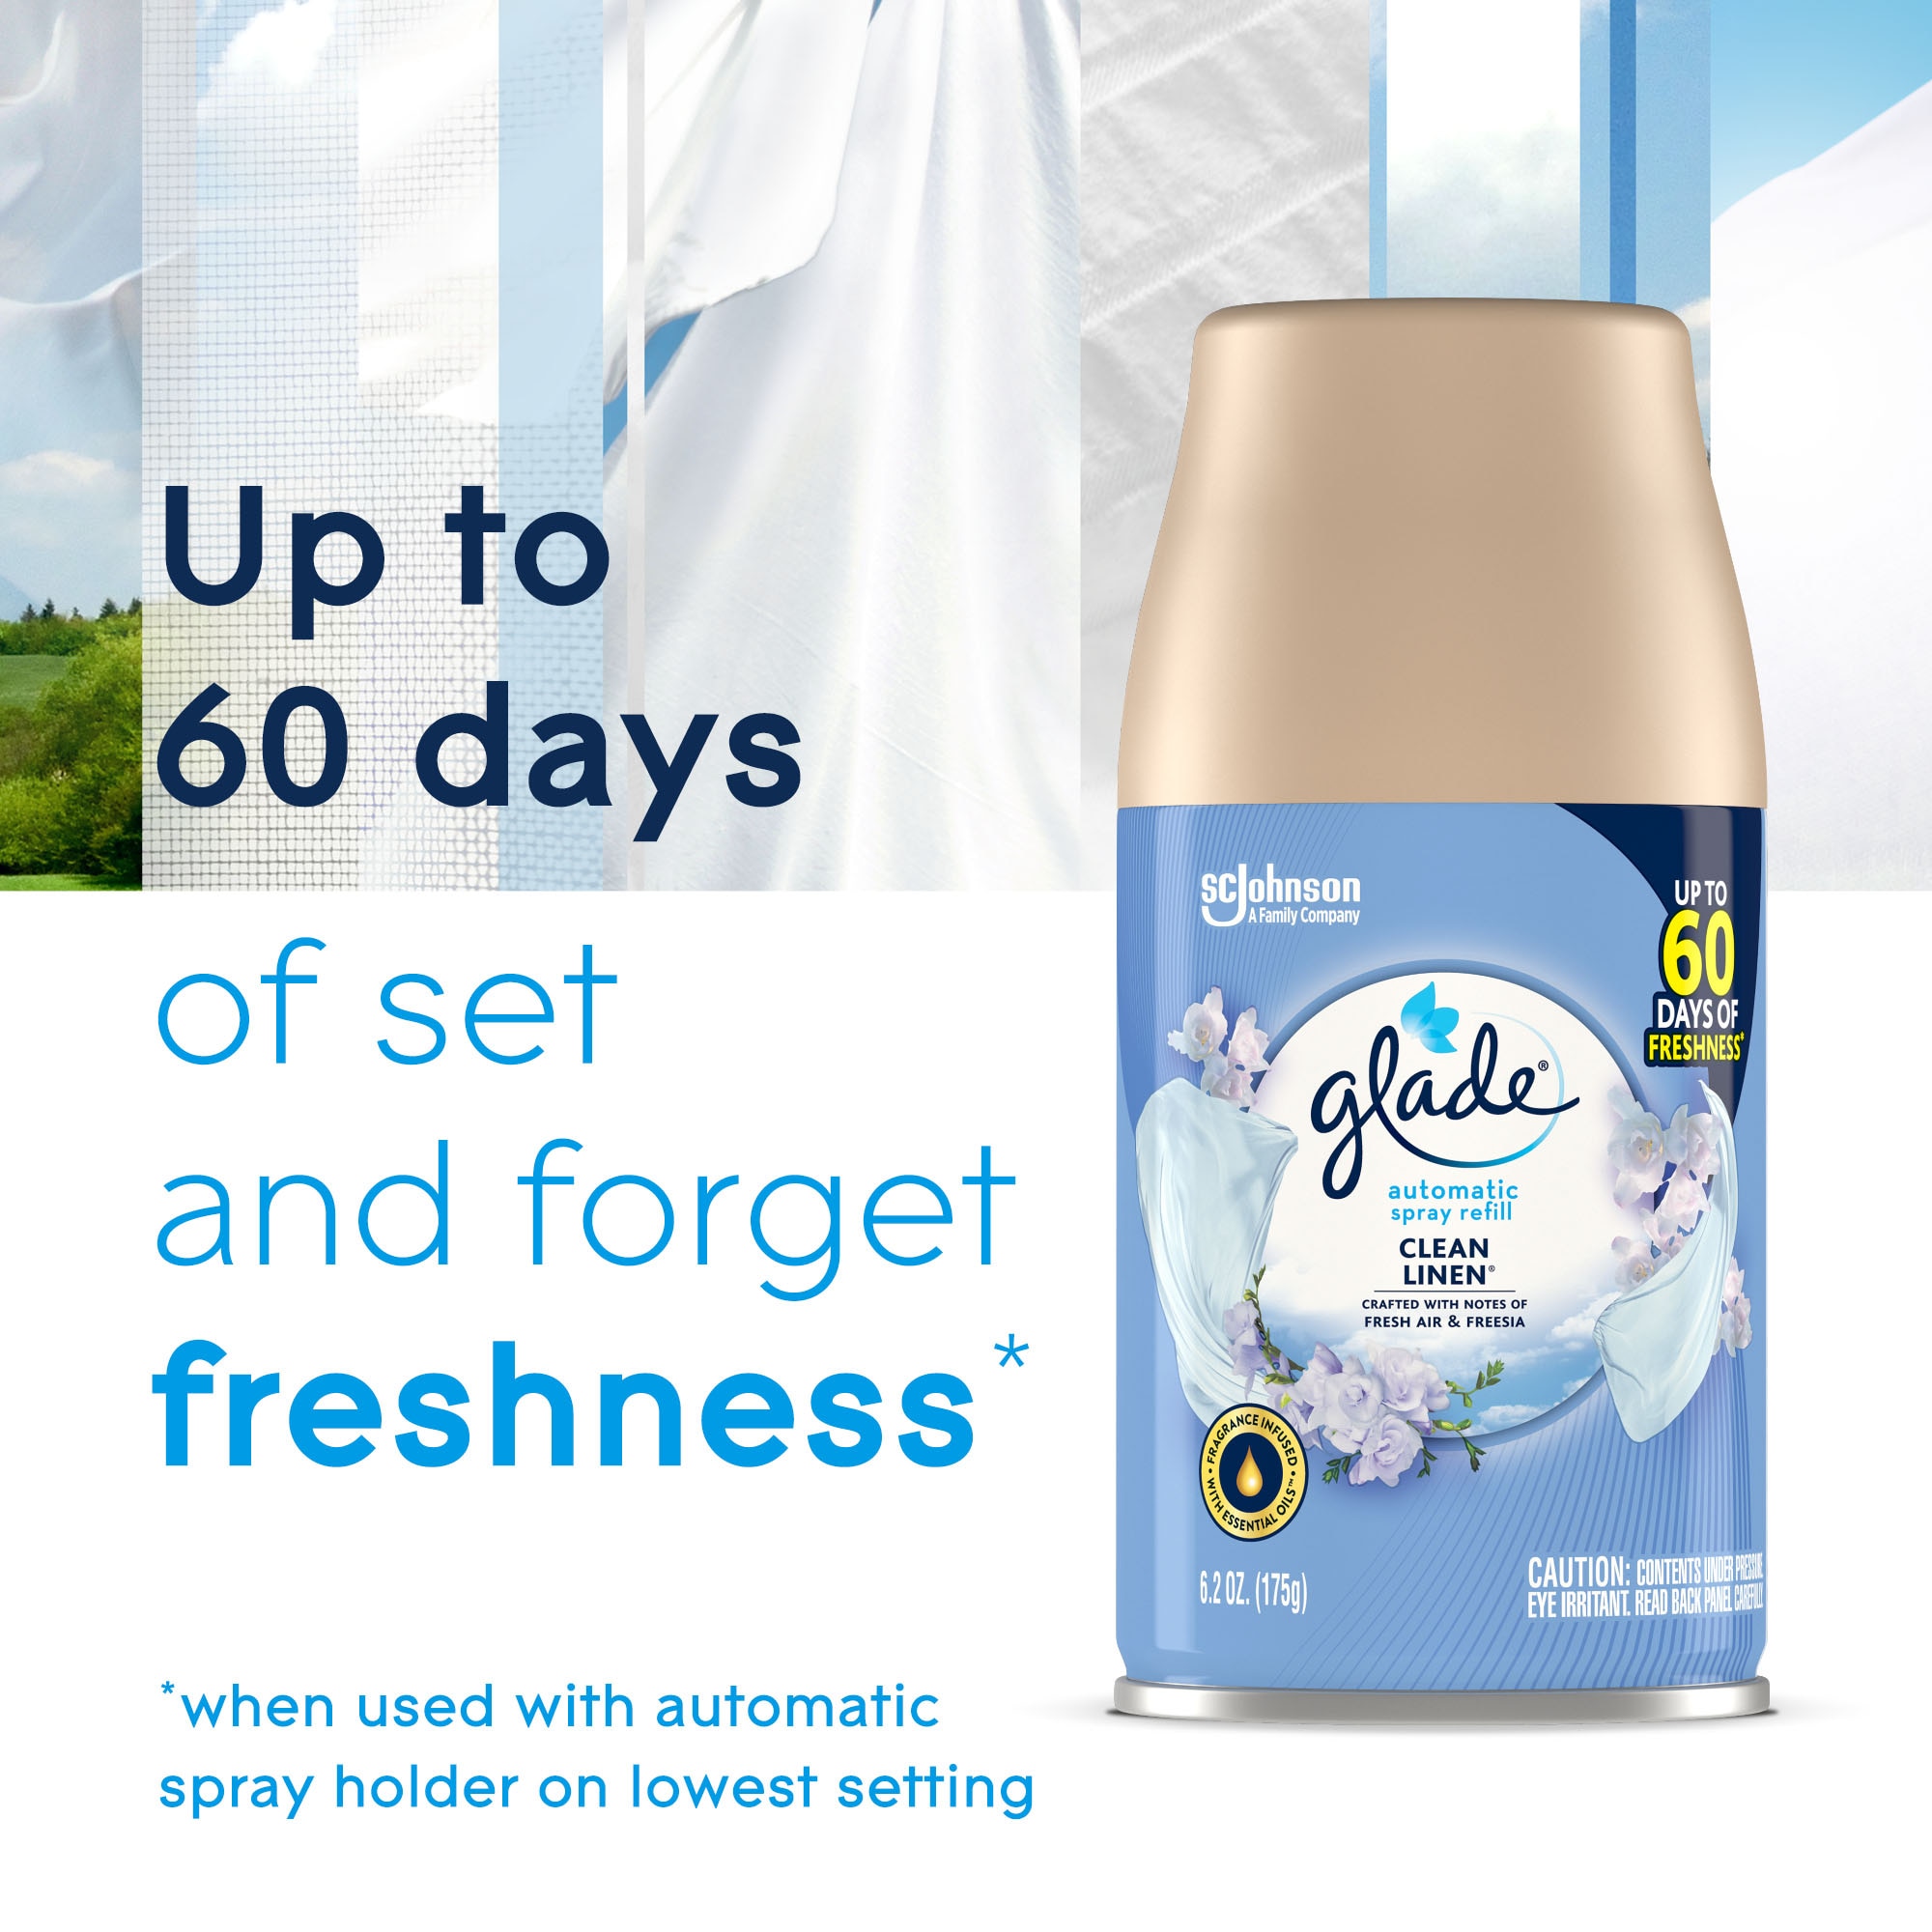 Glade Automatic Spray Air Freshener Refills, 4 ct. (Choose Scent)